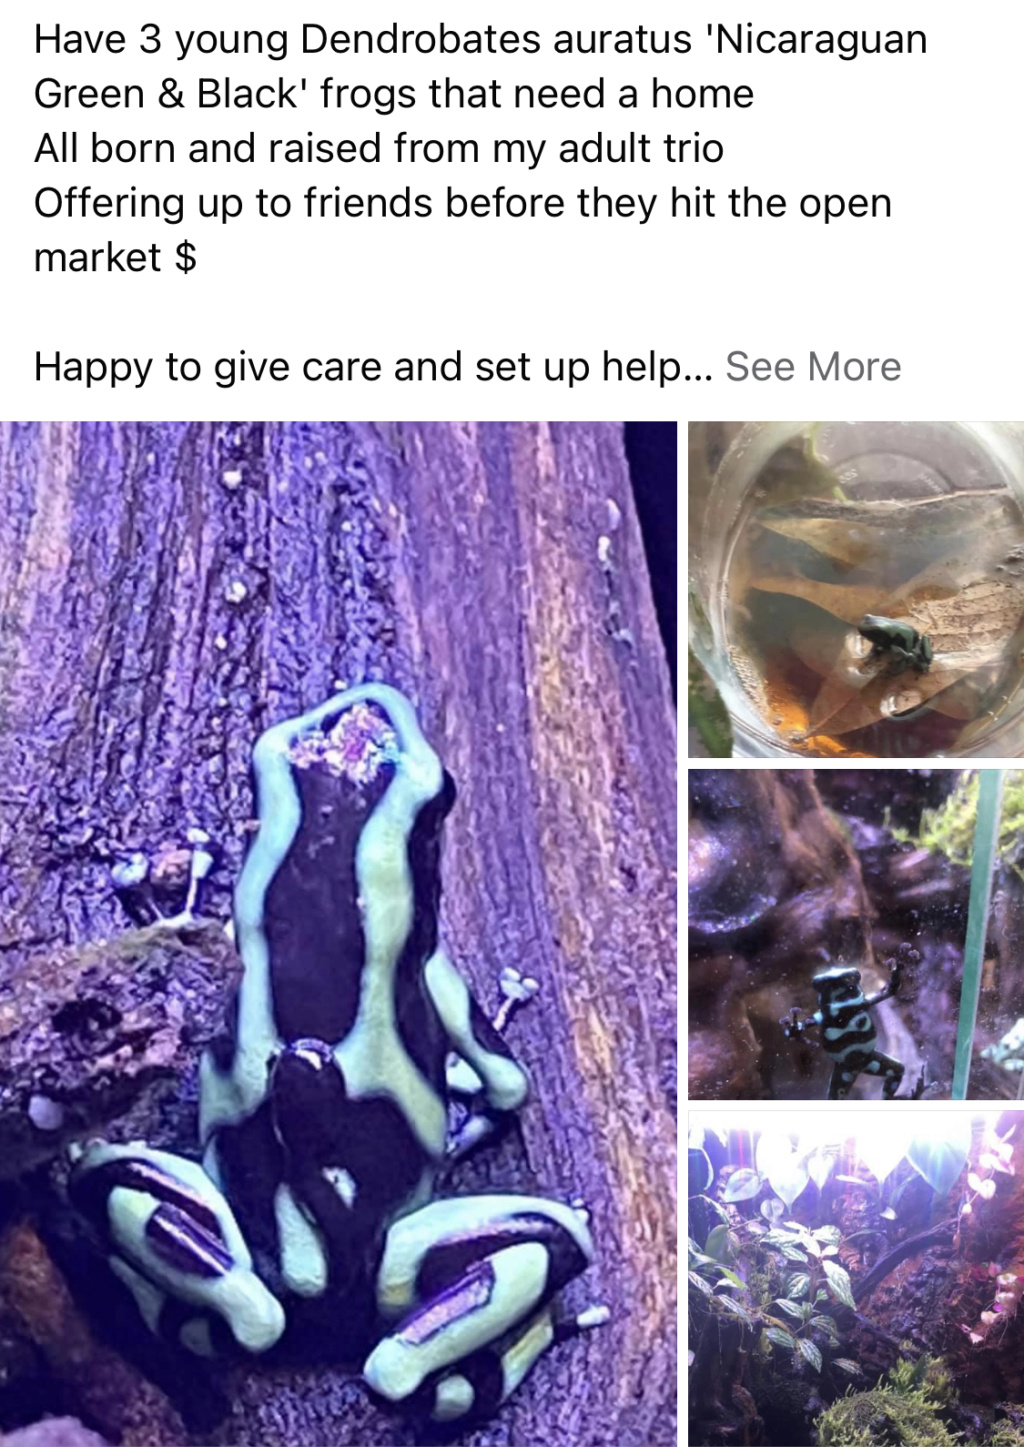 Opportunity to have Dendrobates for your own personal enjoyment. 601f0010